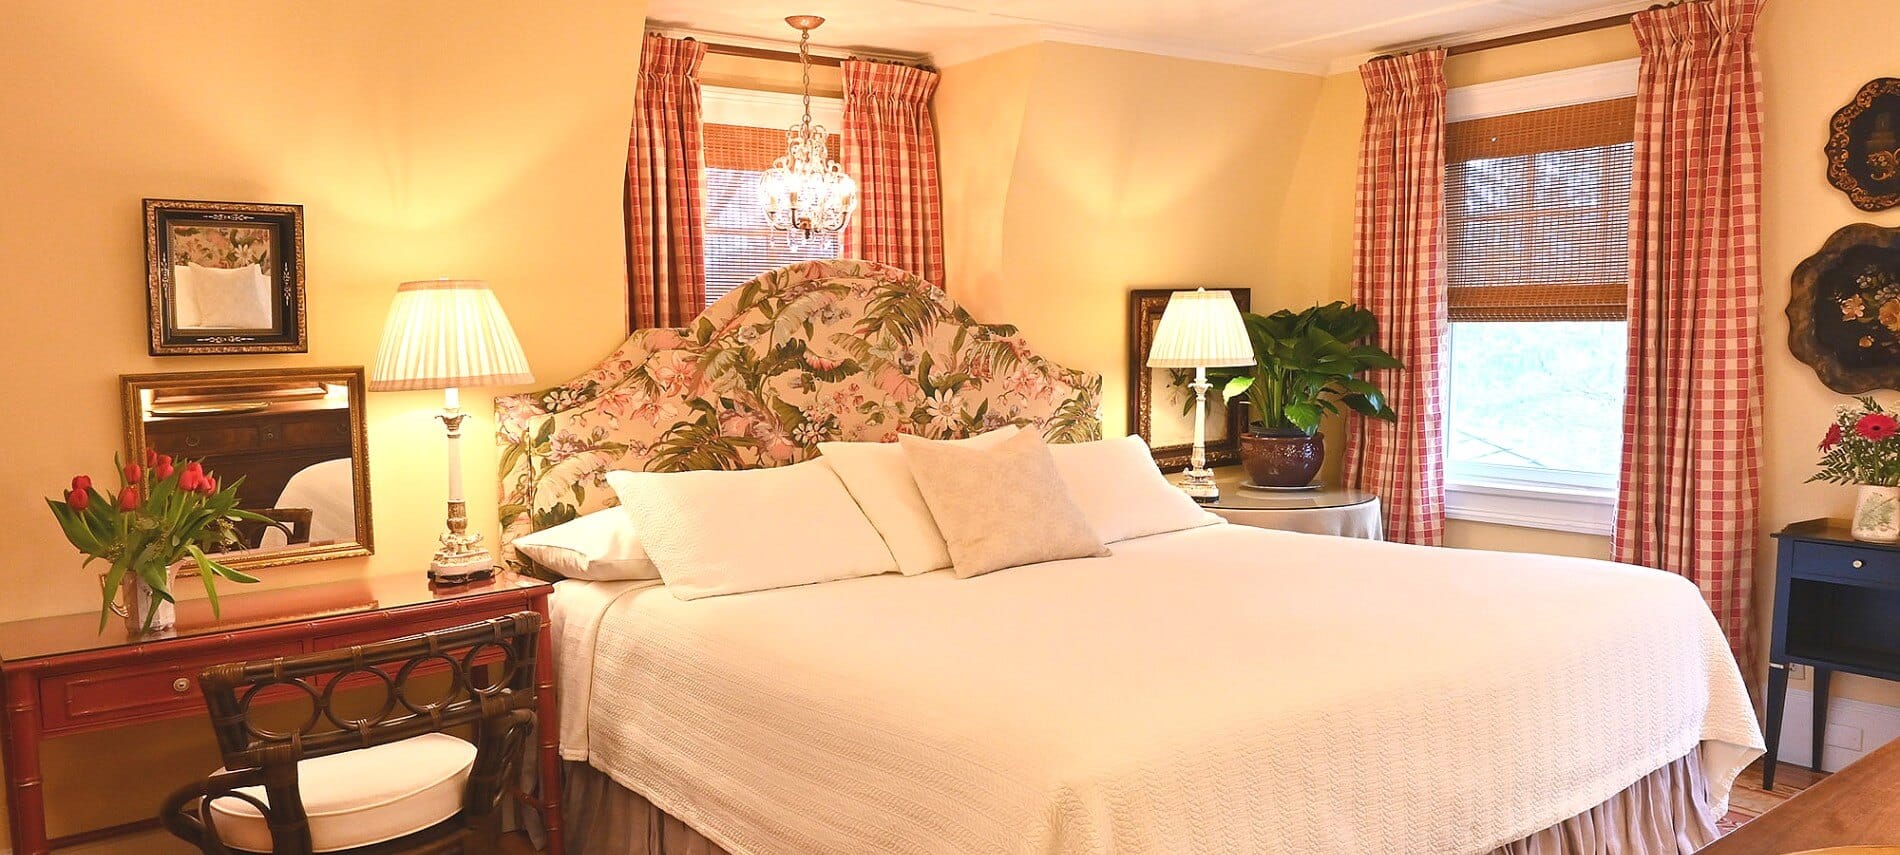 Guest room featuring a king bed with white linens, floral headboard, brown writing desk and two windows with red and white curtains